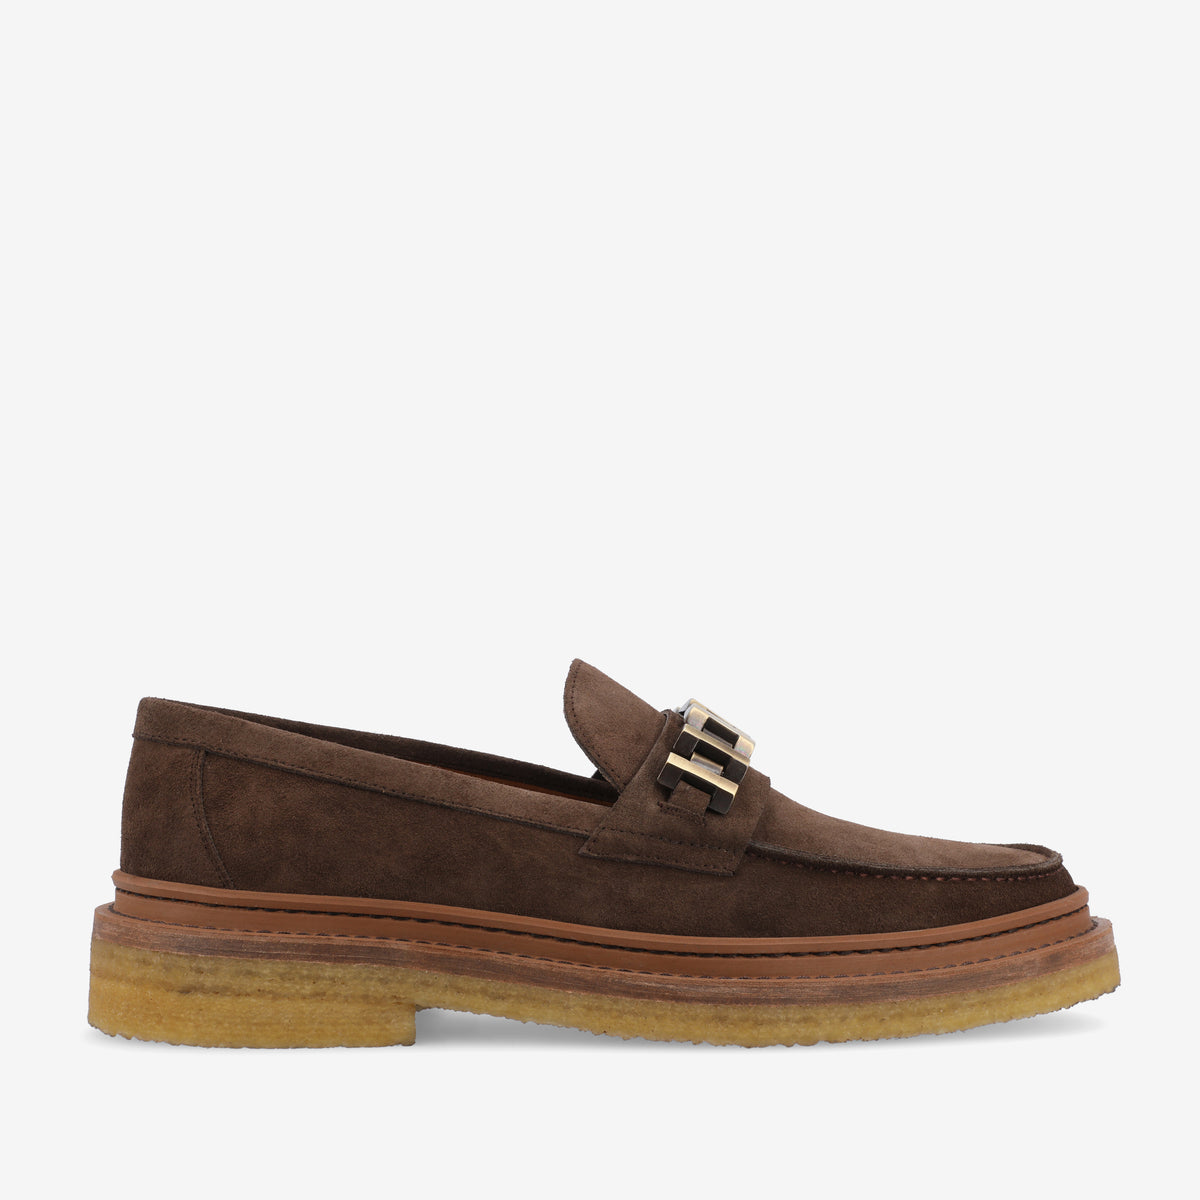 The Verona Loafer in Brown